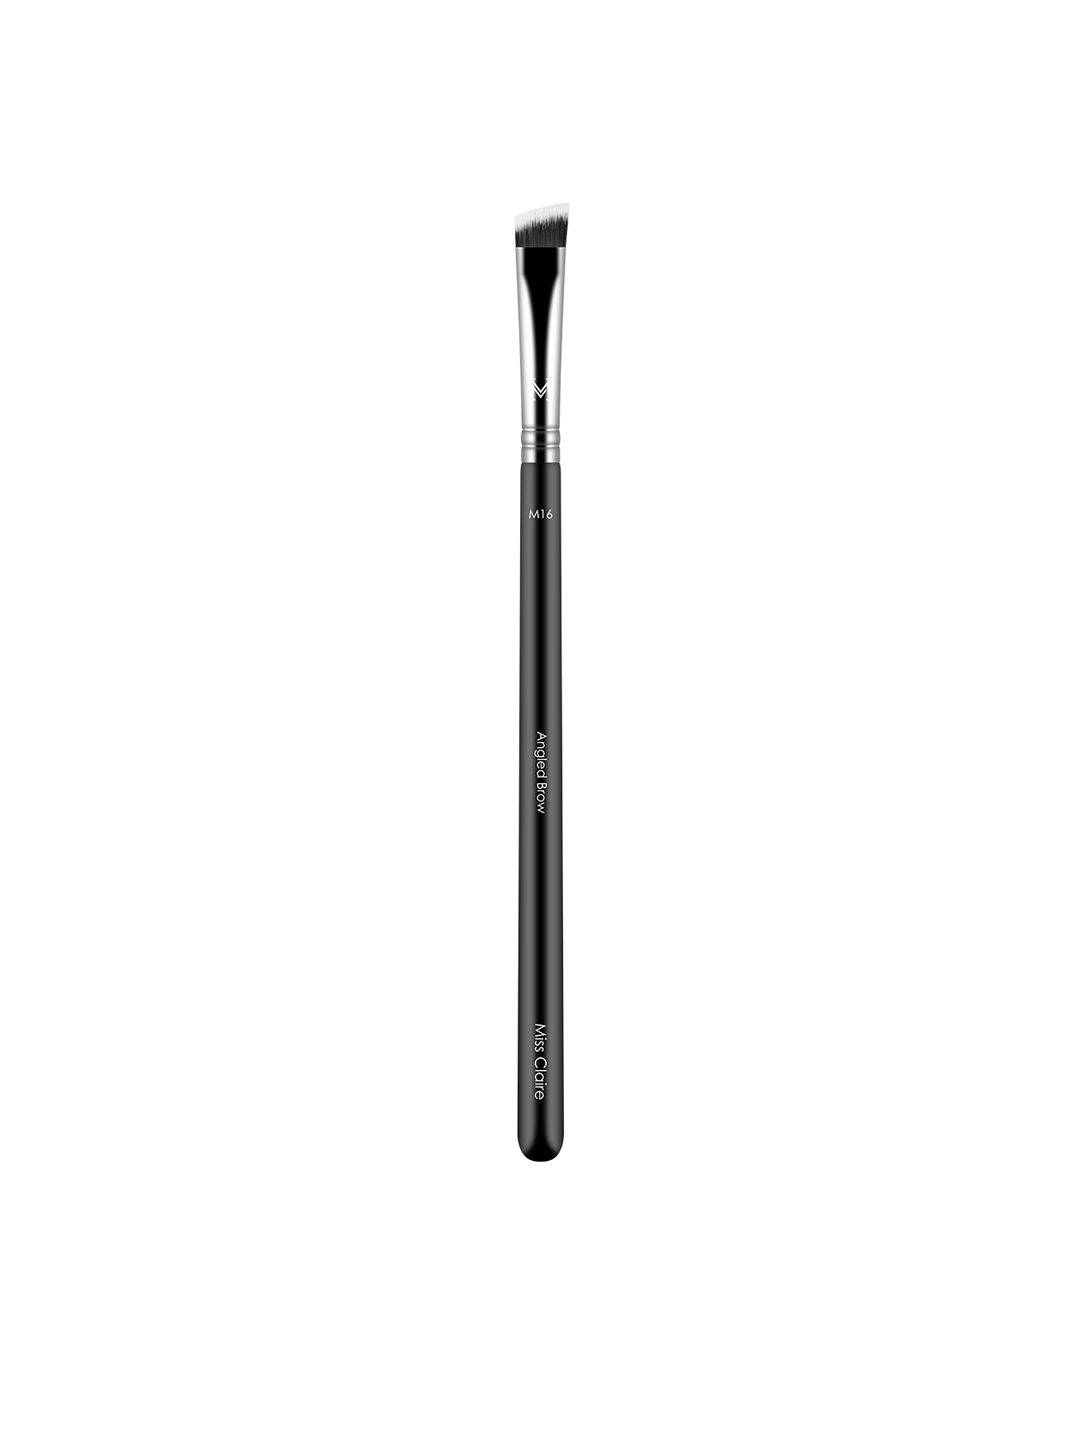 Miss Claire Chrome Angled Brow Brush - M16 Black & Silver-Toned Price in India